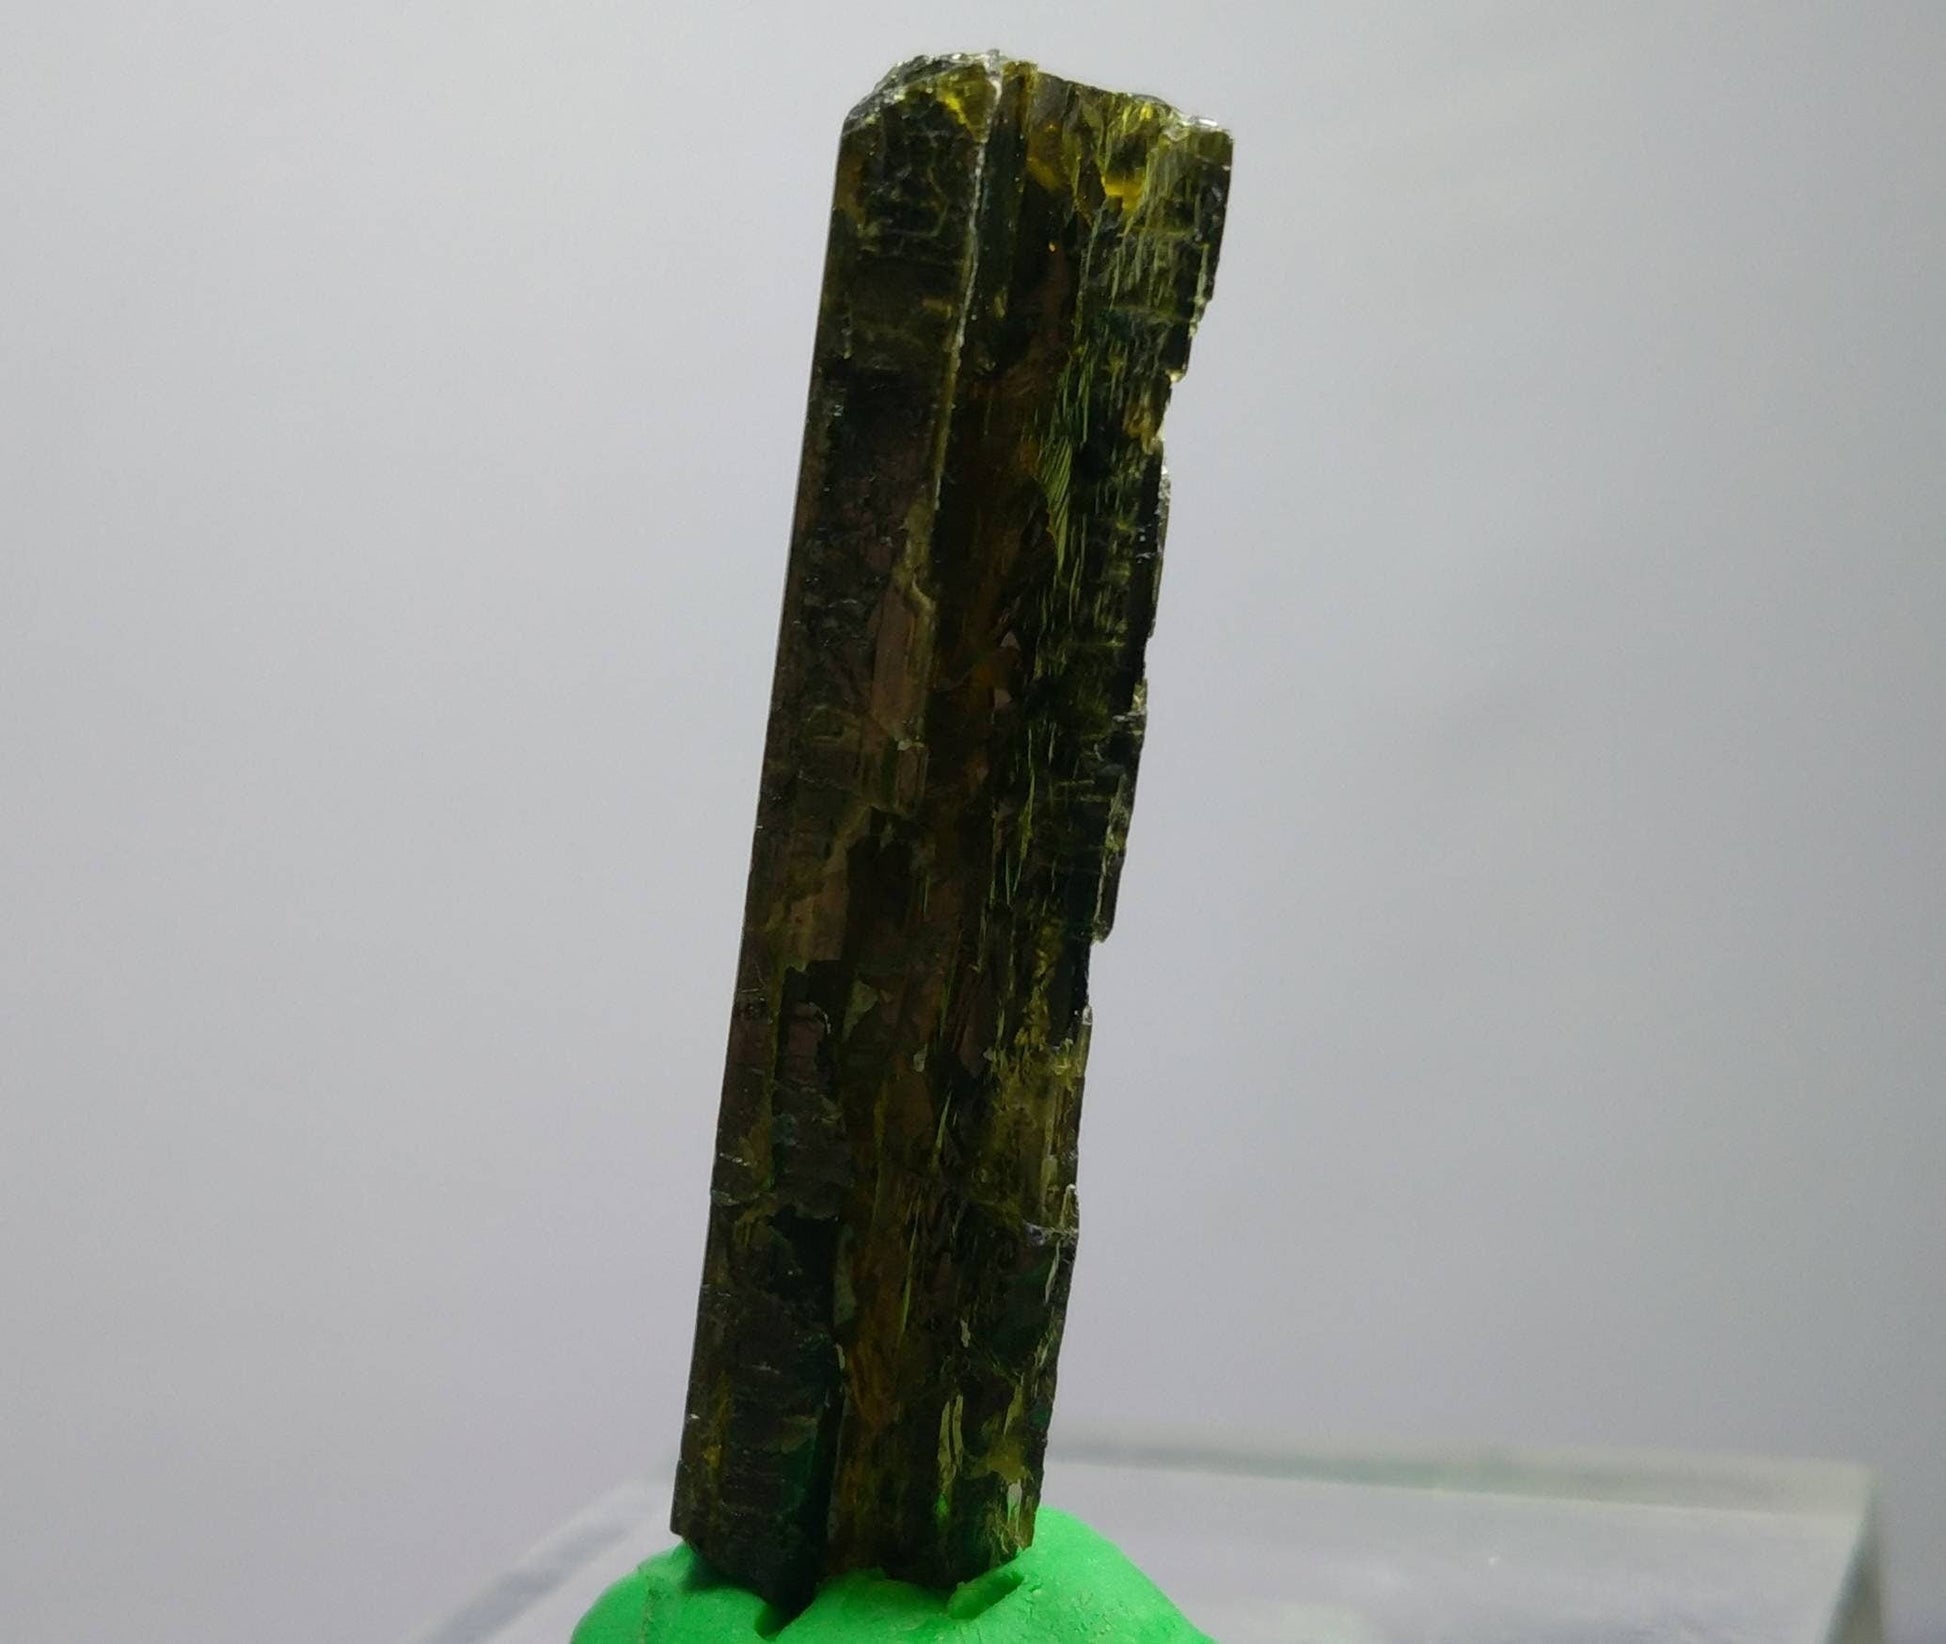 ARSAA GEMS AND MINERALSNatural clear aesthetic 11 grams Beautiful perfectly terminated etched pleochroic  epidote crystal - Premium  from ARSAA GEMS AND MINERALS - Just $35.00! Shop now at ARSAA GEMS AND MINERALS